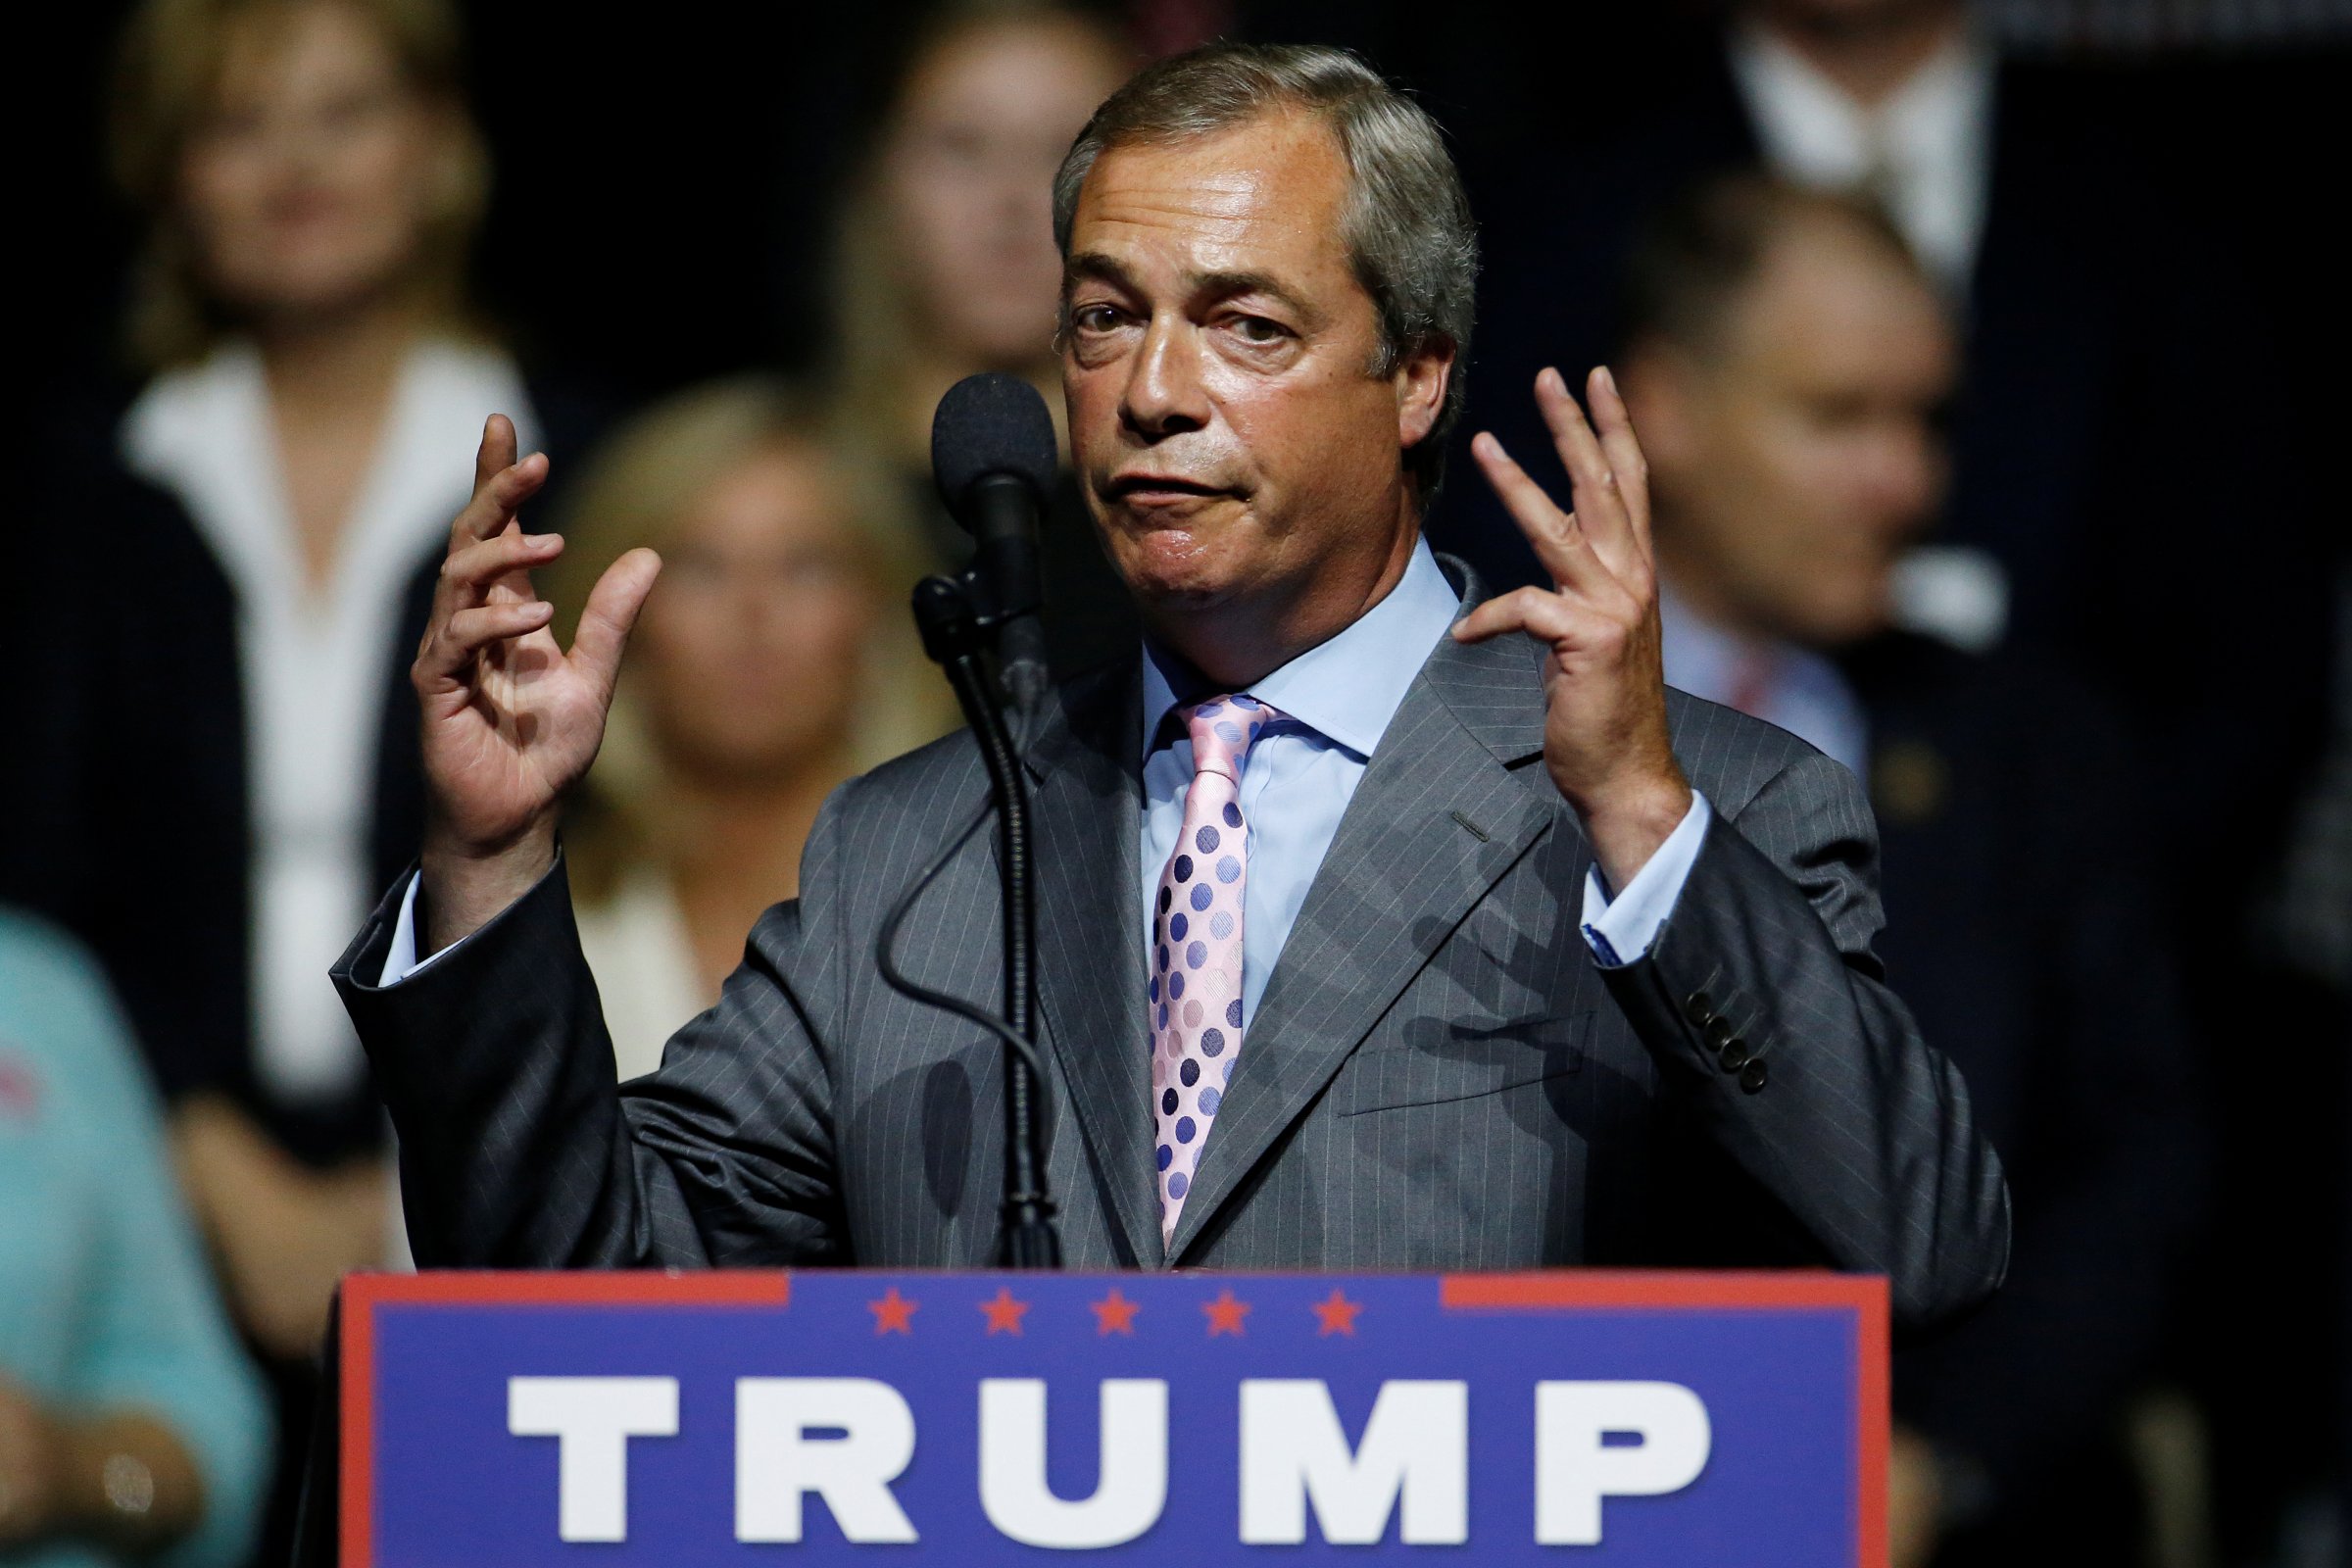 European Parliament Nigel Farage speaks during a Republican presidential nominee Donald Trump campaign rally in Jackson